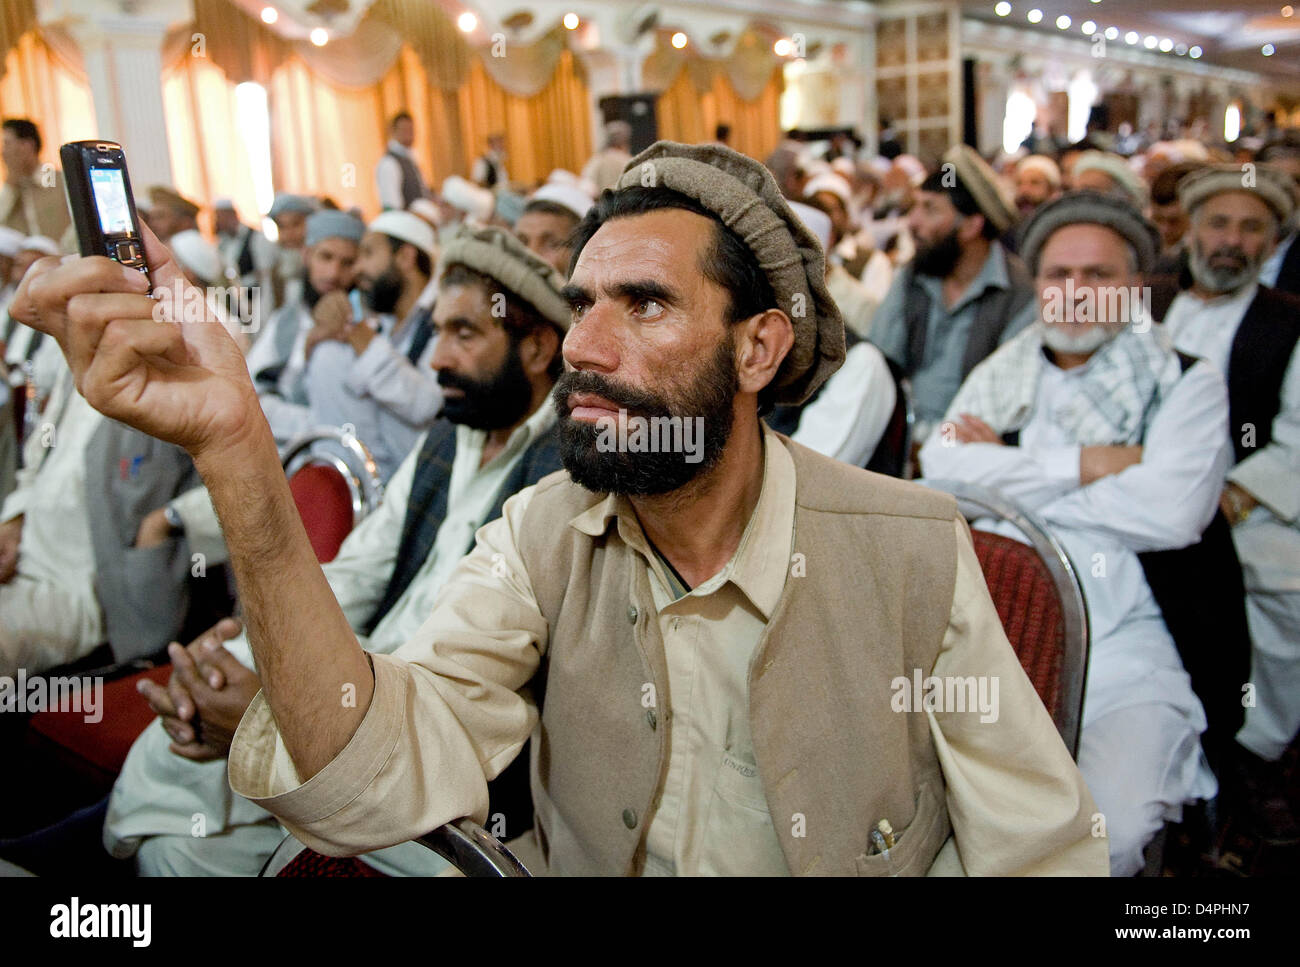 Followers of Hizb-e Islami party listen to speeches delivered at a party convetion in Kabul, Afghanistan, 29 June 2009. Hizb-e Islami proclaimed endorsing current Afghan President Hamid Karzai when he re-runs for office on 20 August in the second free elections in Afghanistan since 2001. A total of 42 people run for President. Photo: Marcel Mettelsiefen Stock Photo